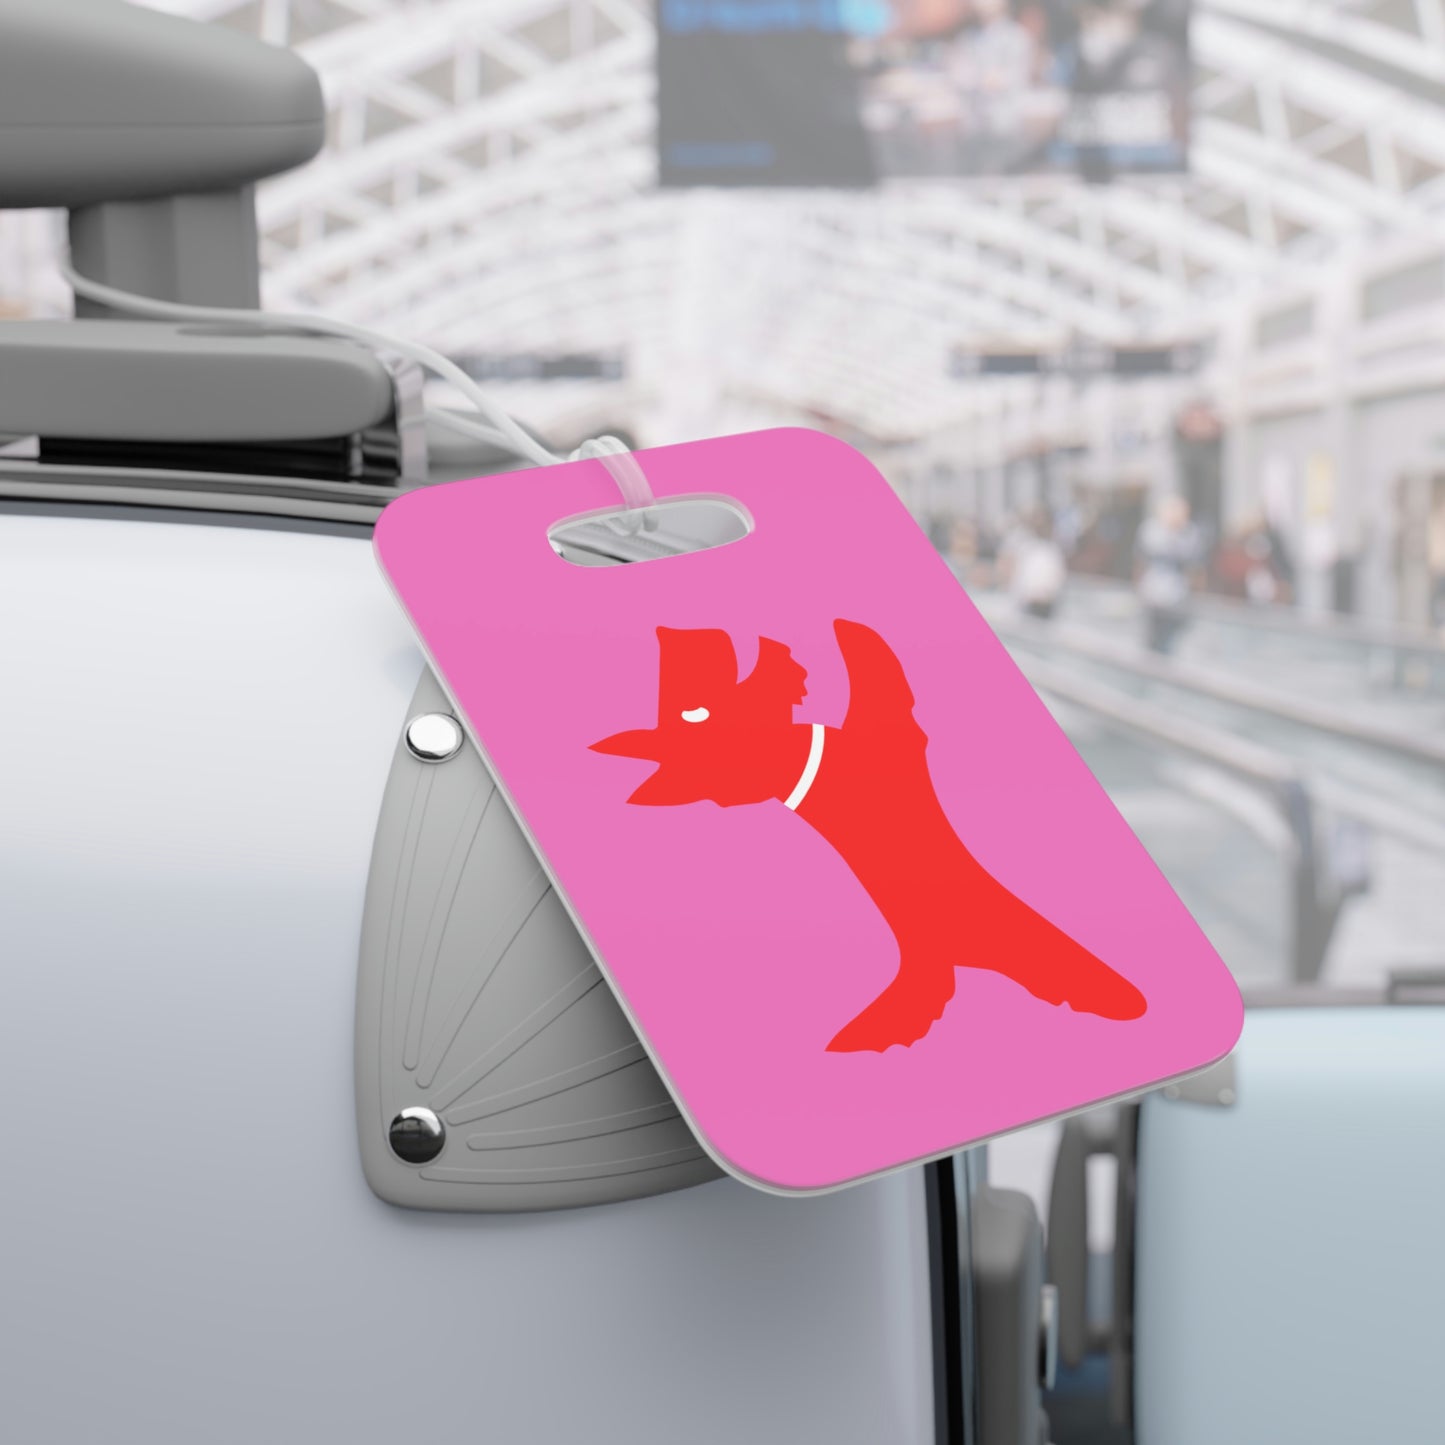 Perky's Bag Tag in Red